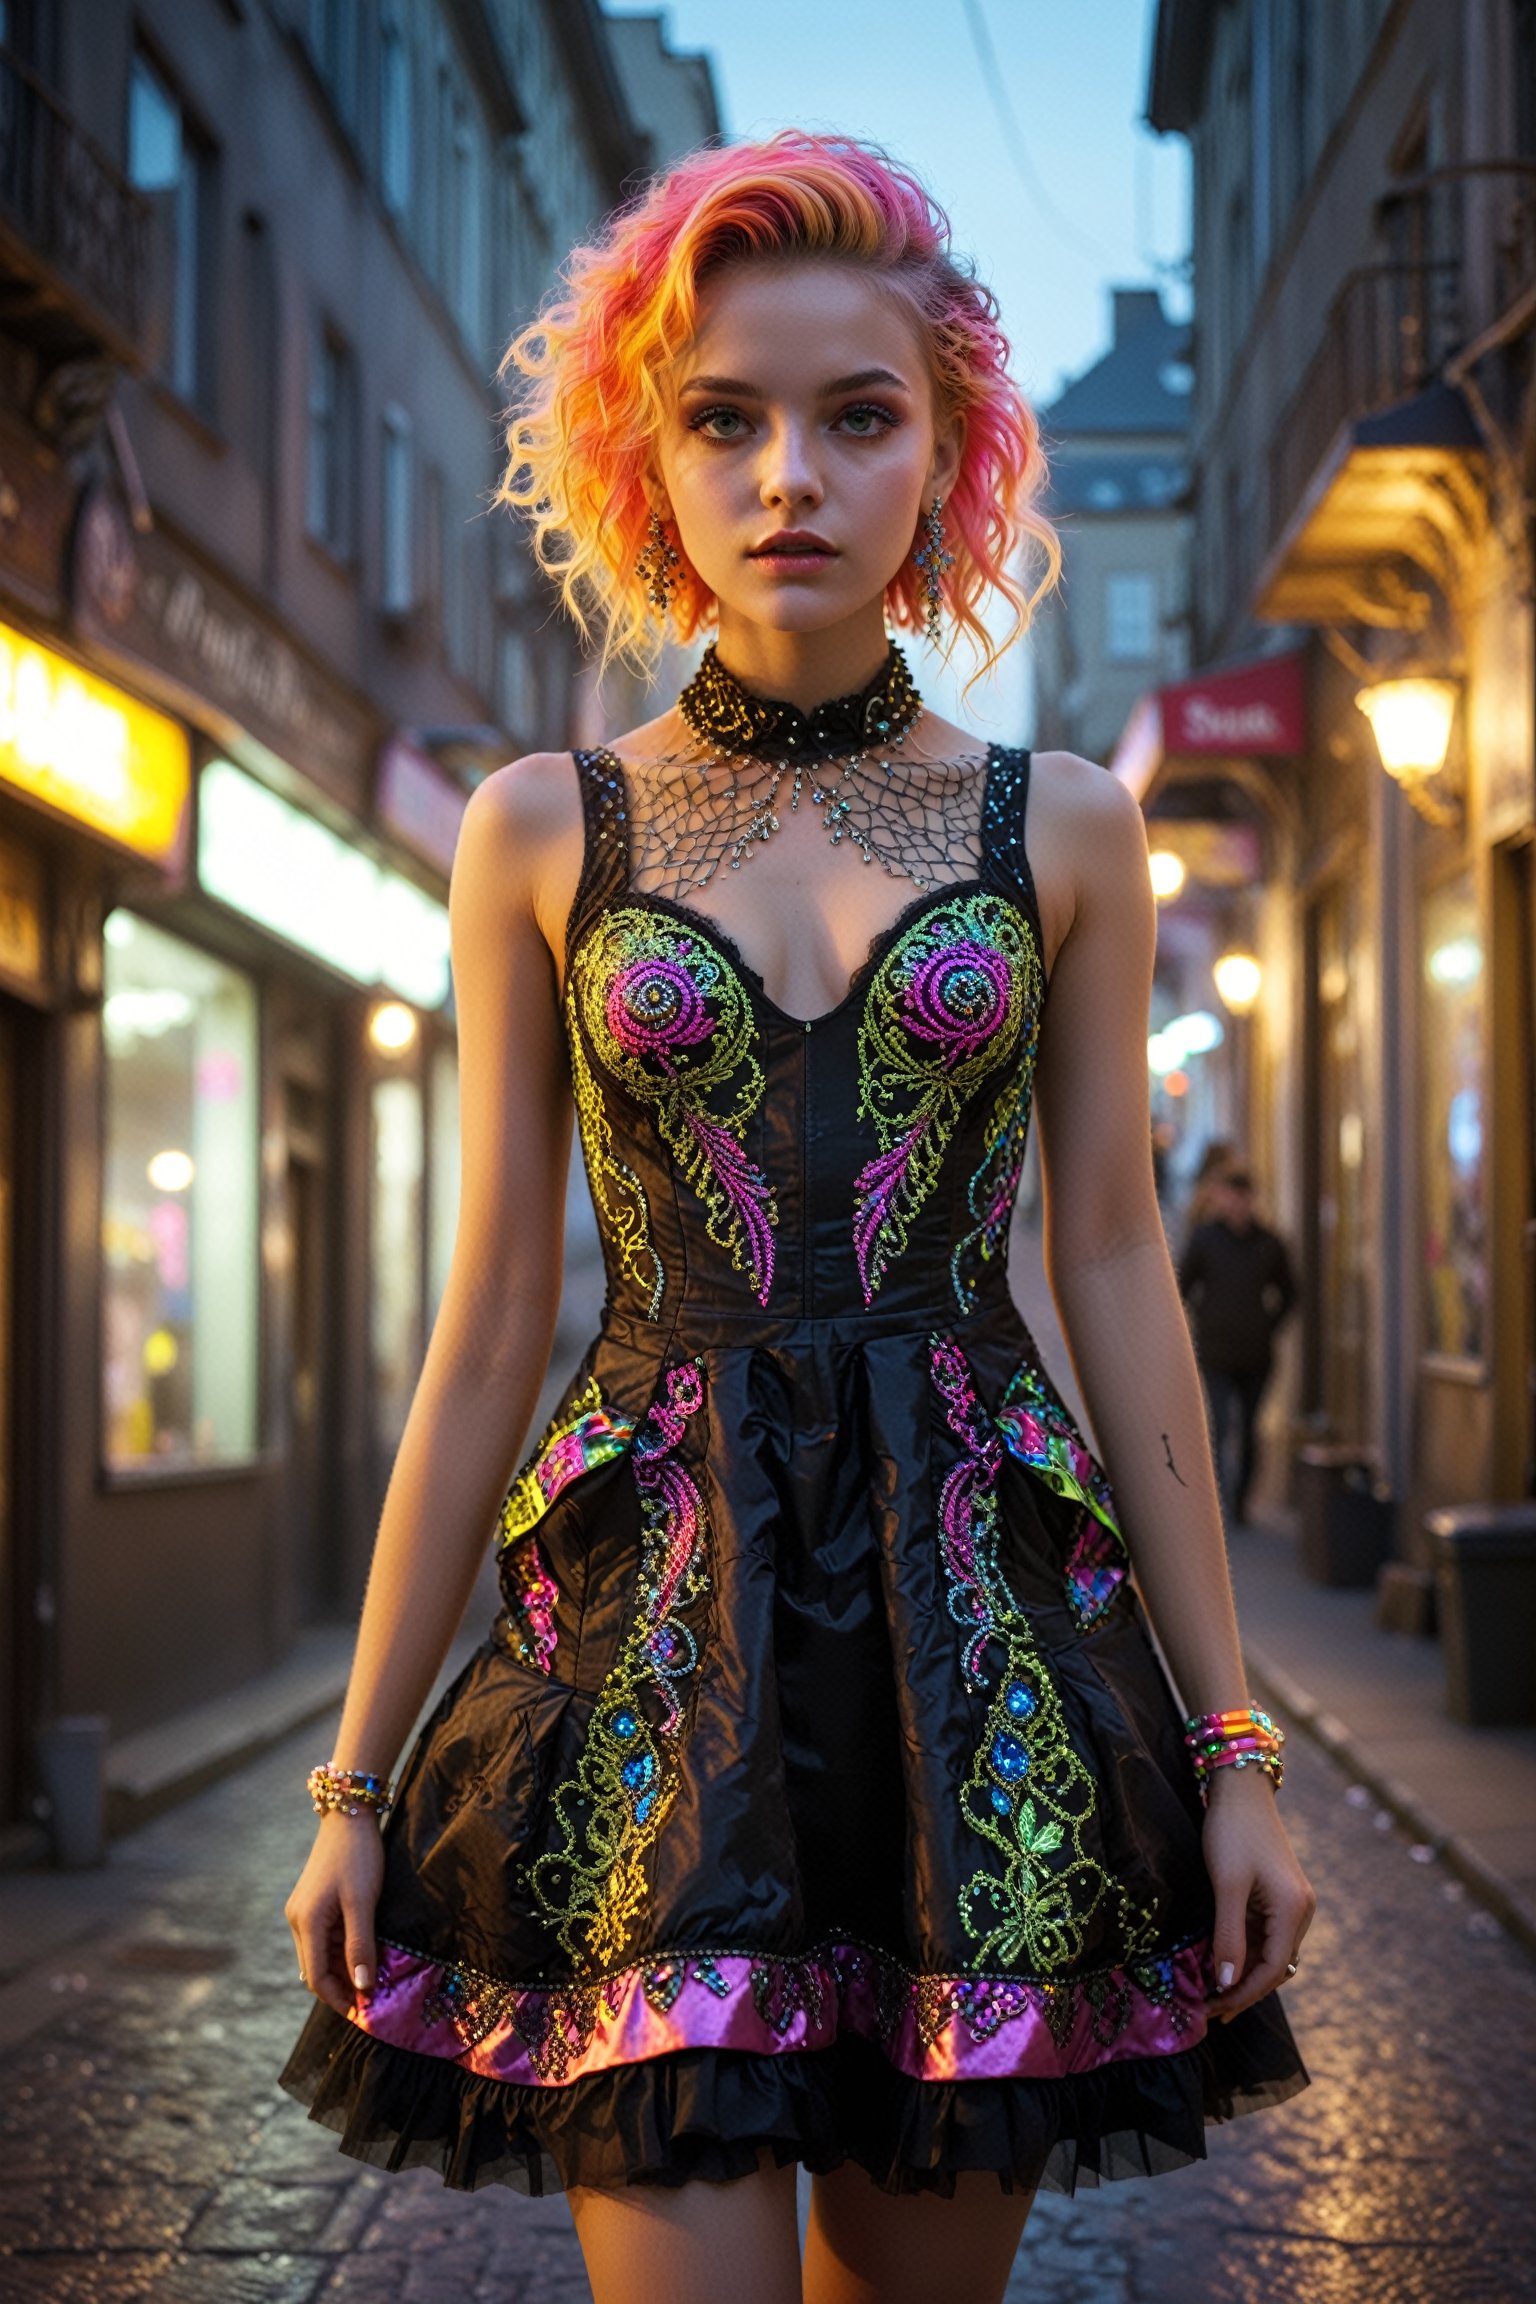 1girl, a girl in a Baroque-style neon punk fashion. She wears an elegant, glowing dress with intricate patterns and vibrant, luminous colors. Her hair is styled in a mix of Baroque elegance and punk flair, possibly adorned with small, glowing accessories. her dress casting an ethereal glow on the gritty urban surroundings, blending historical elegance with futuristic street style.,mad-cyberspace